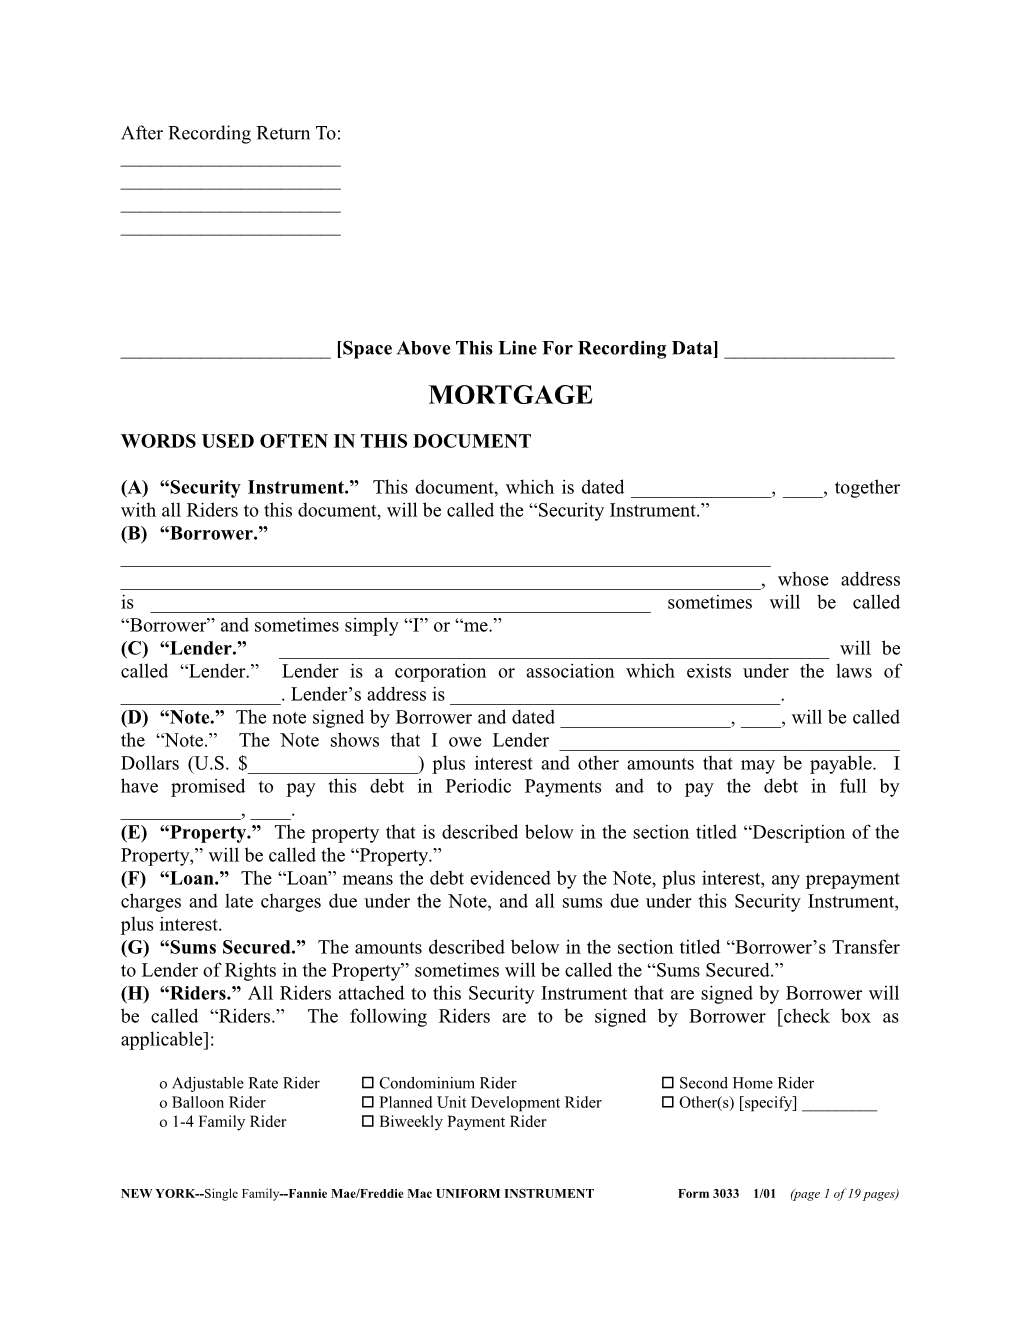 New York Security Instrument (Form 3033): Word